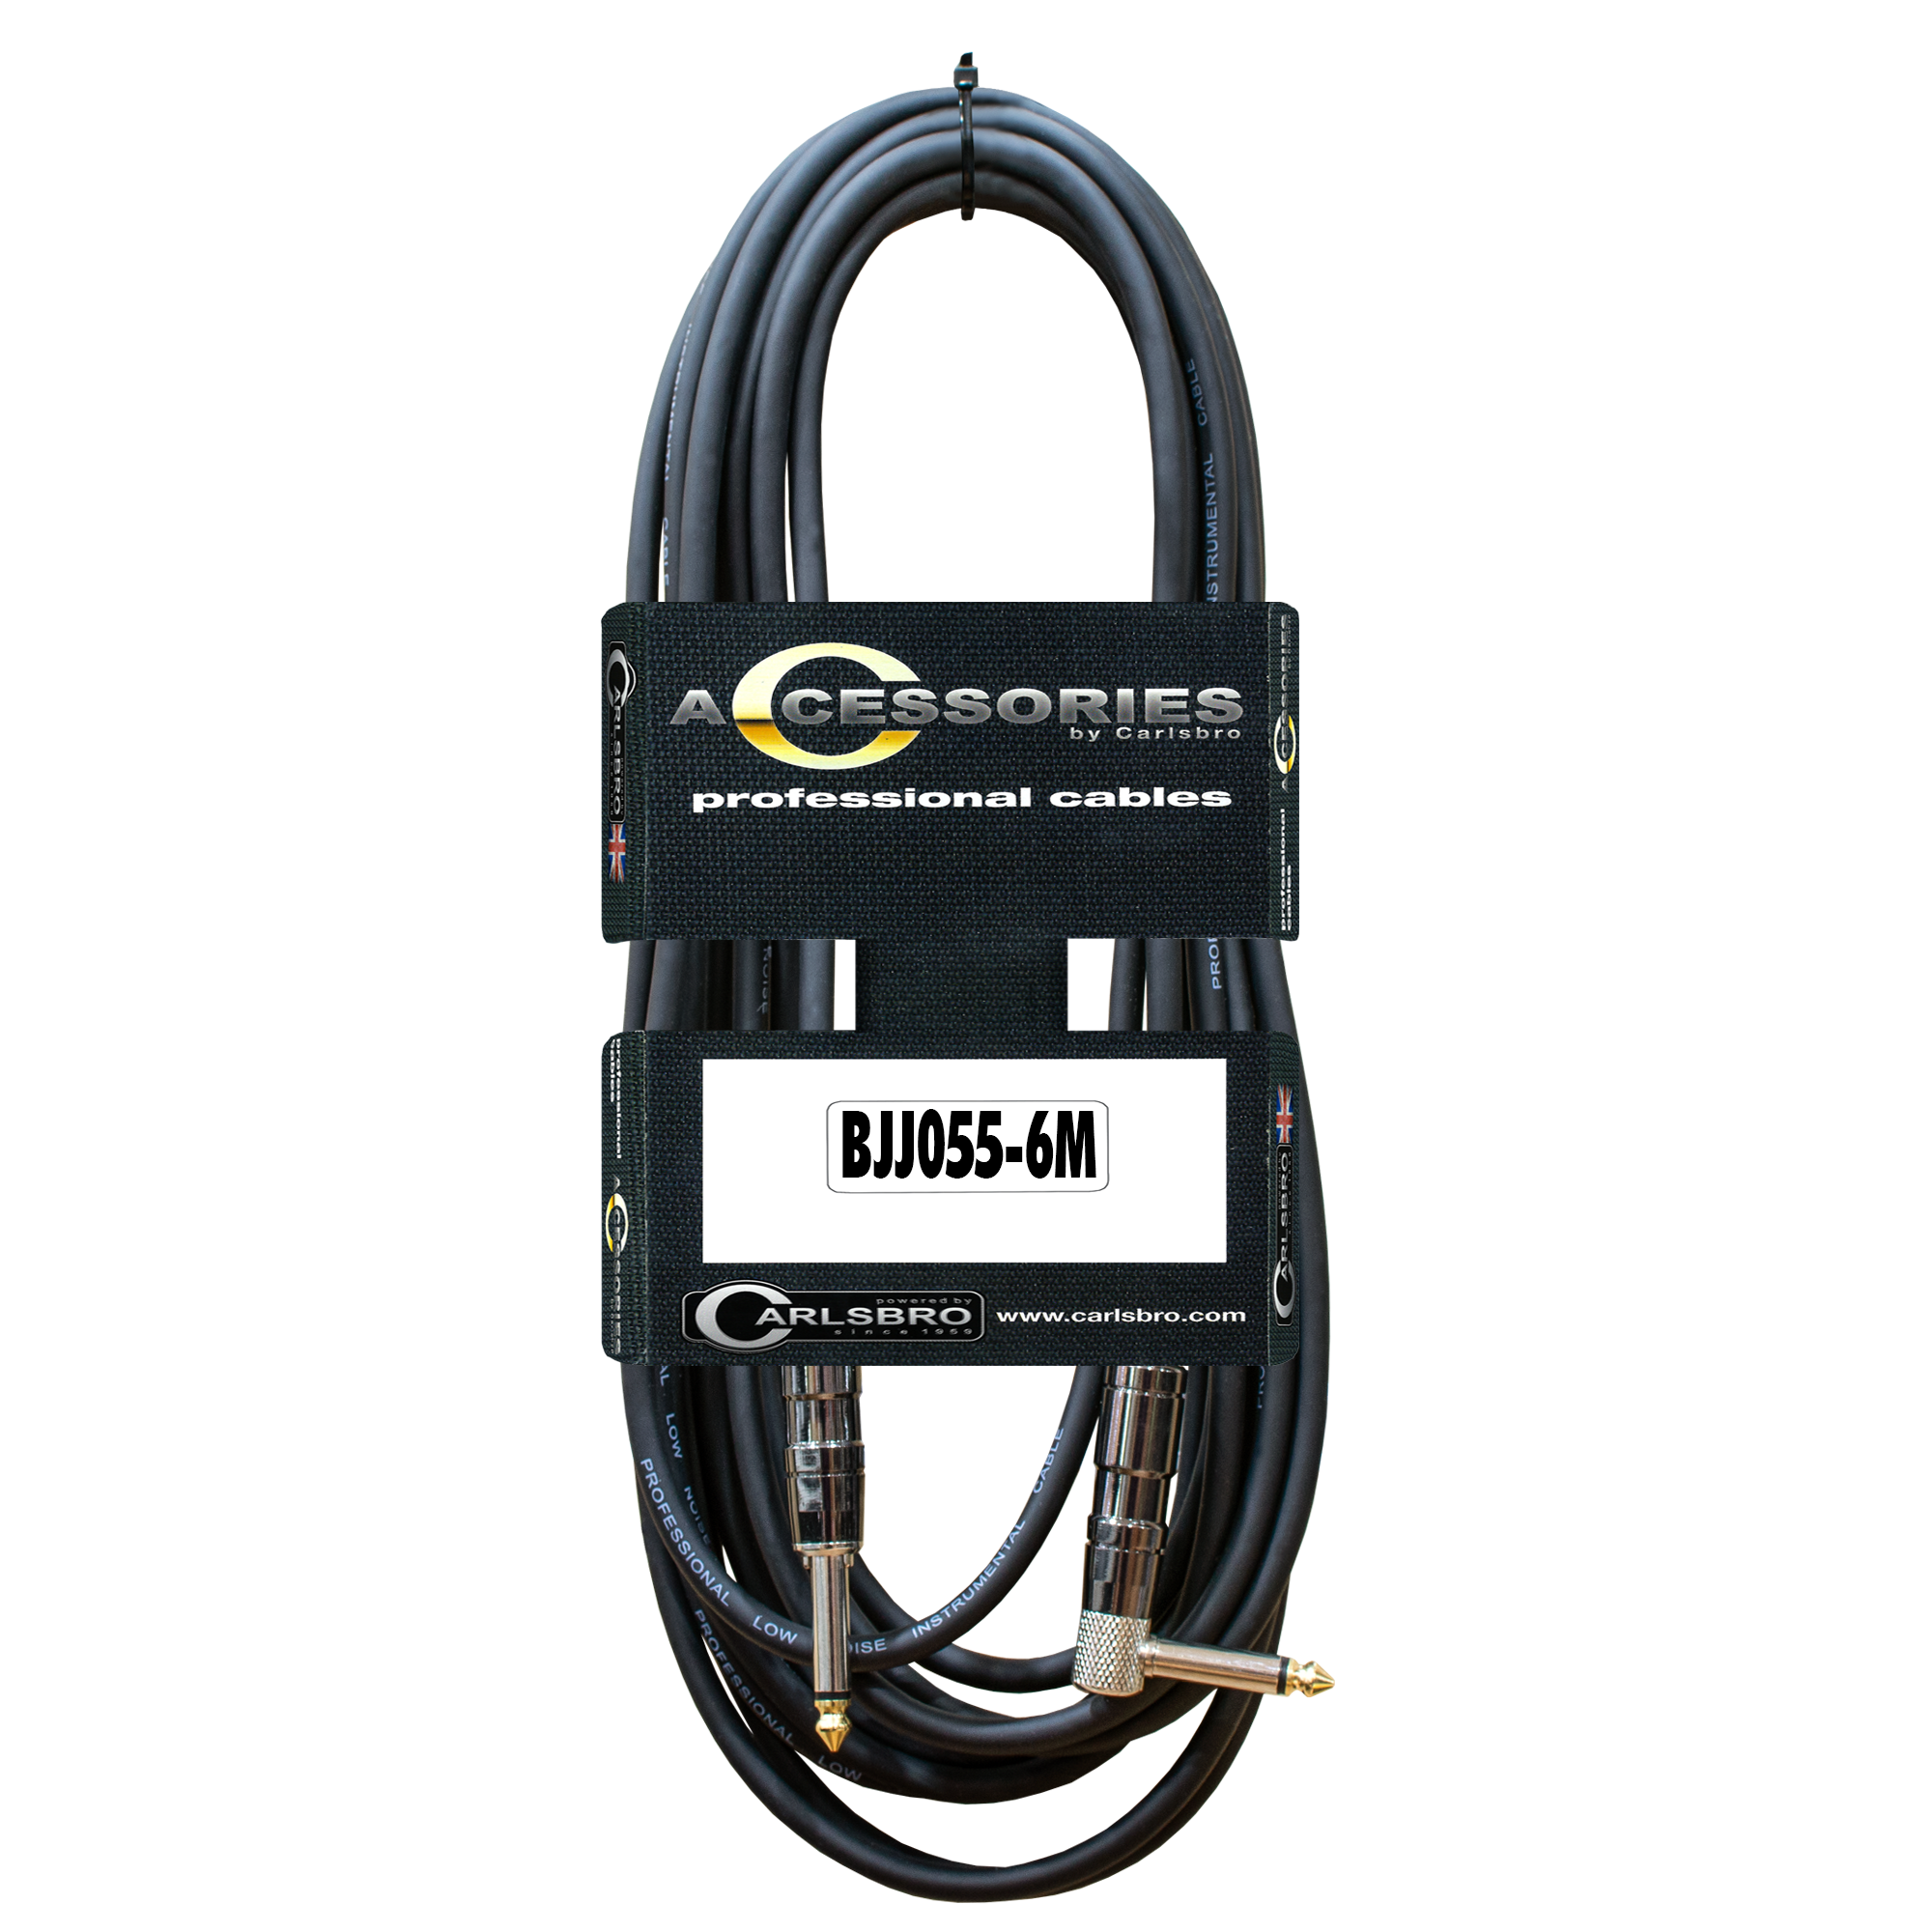 CARLSBRO BJJ055-6M Instrument Cable With Mute Function 6M